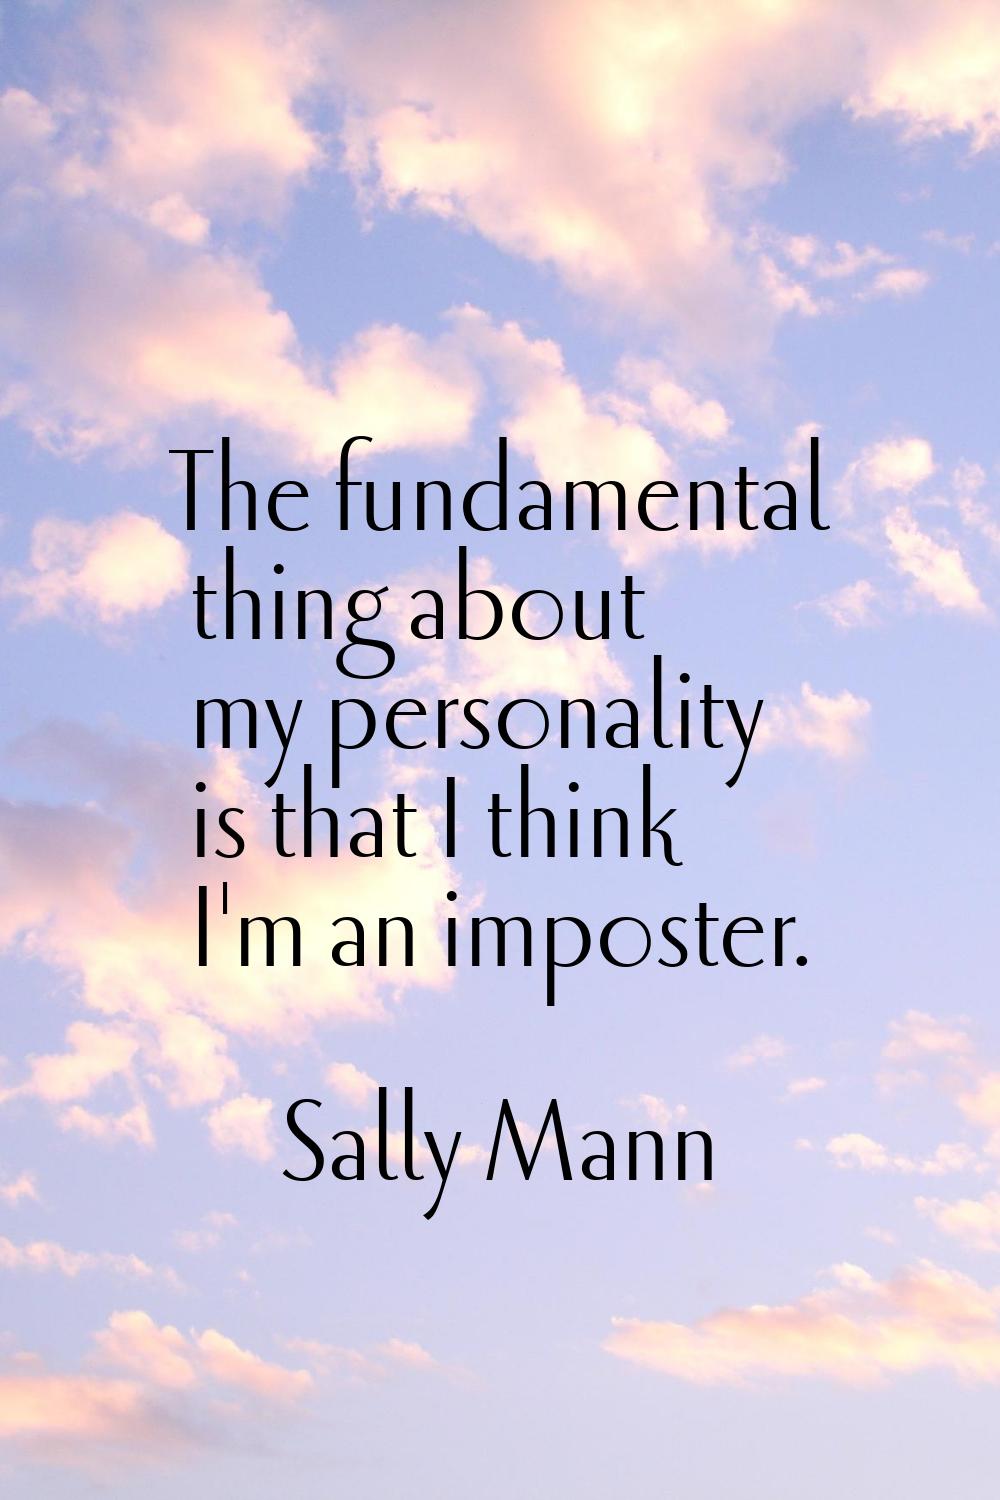 The fundamental thing about my personality is that I think I'm an imposter.